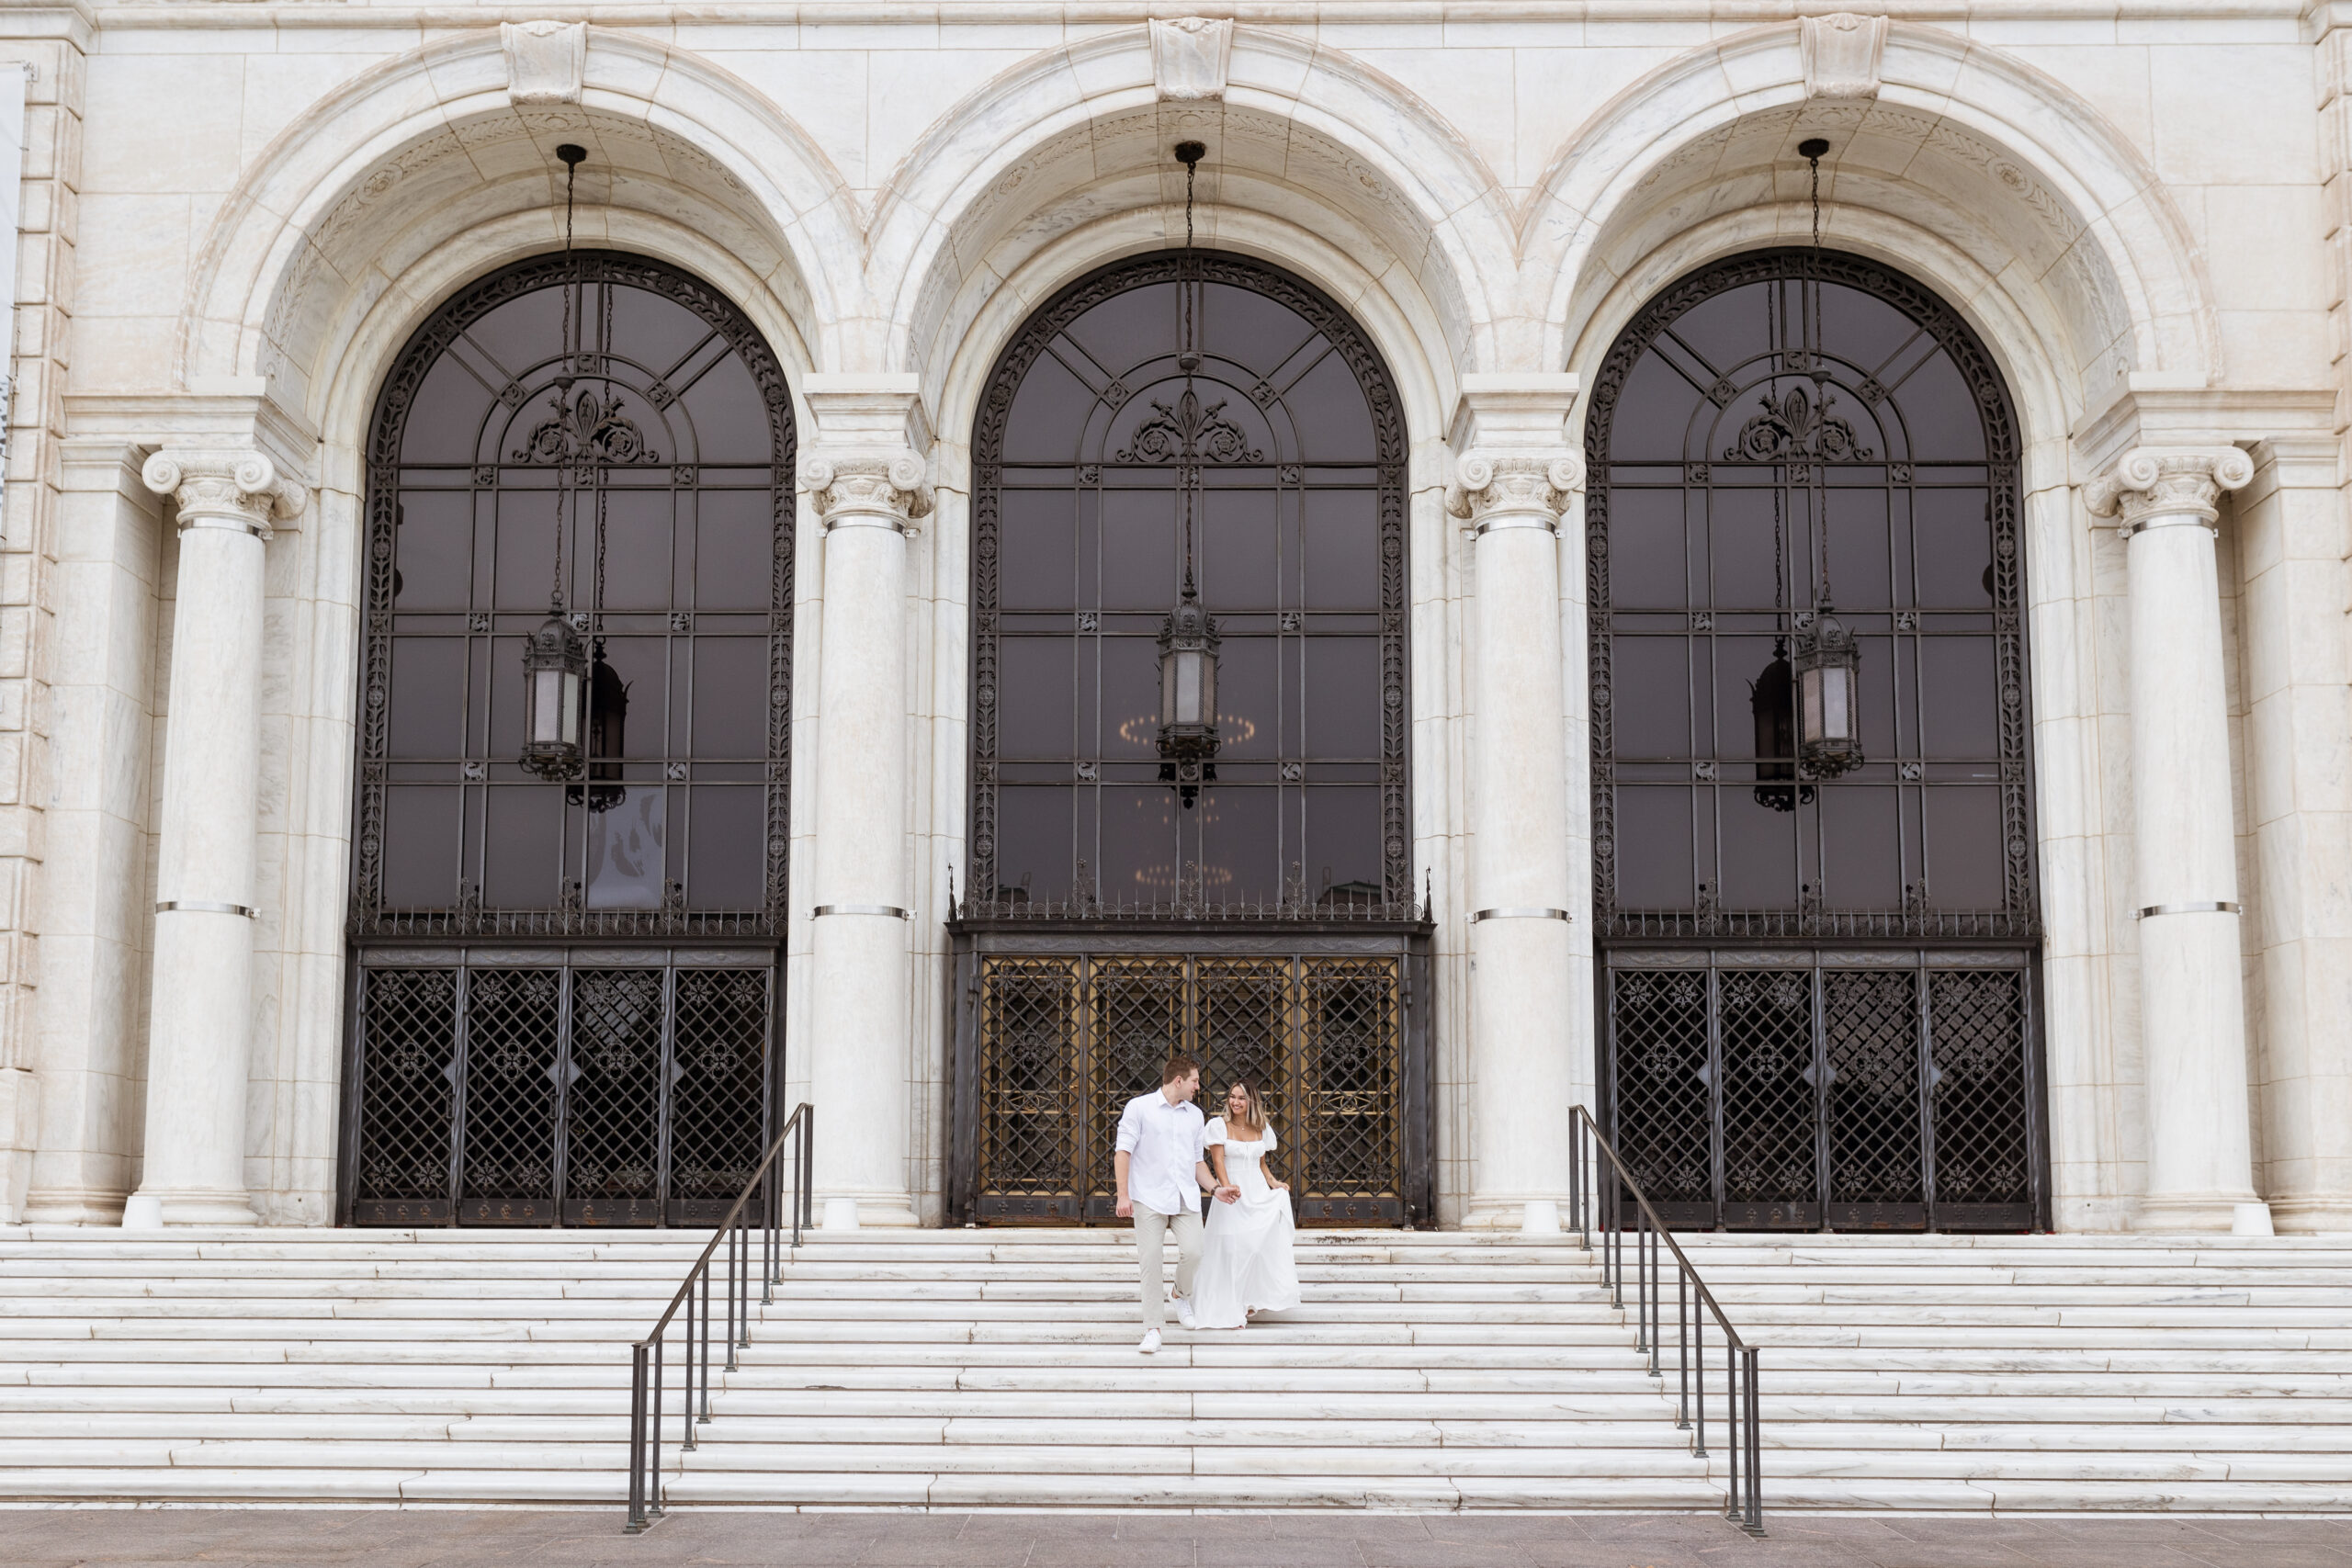 Engagement photography at the Detroit Institute of Arts in Detroit